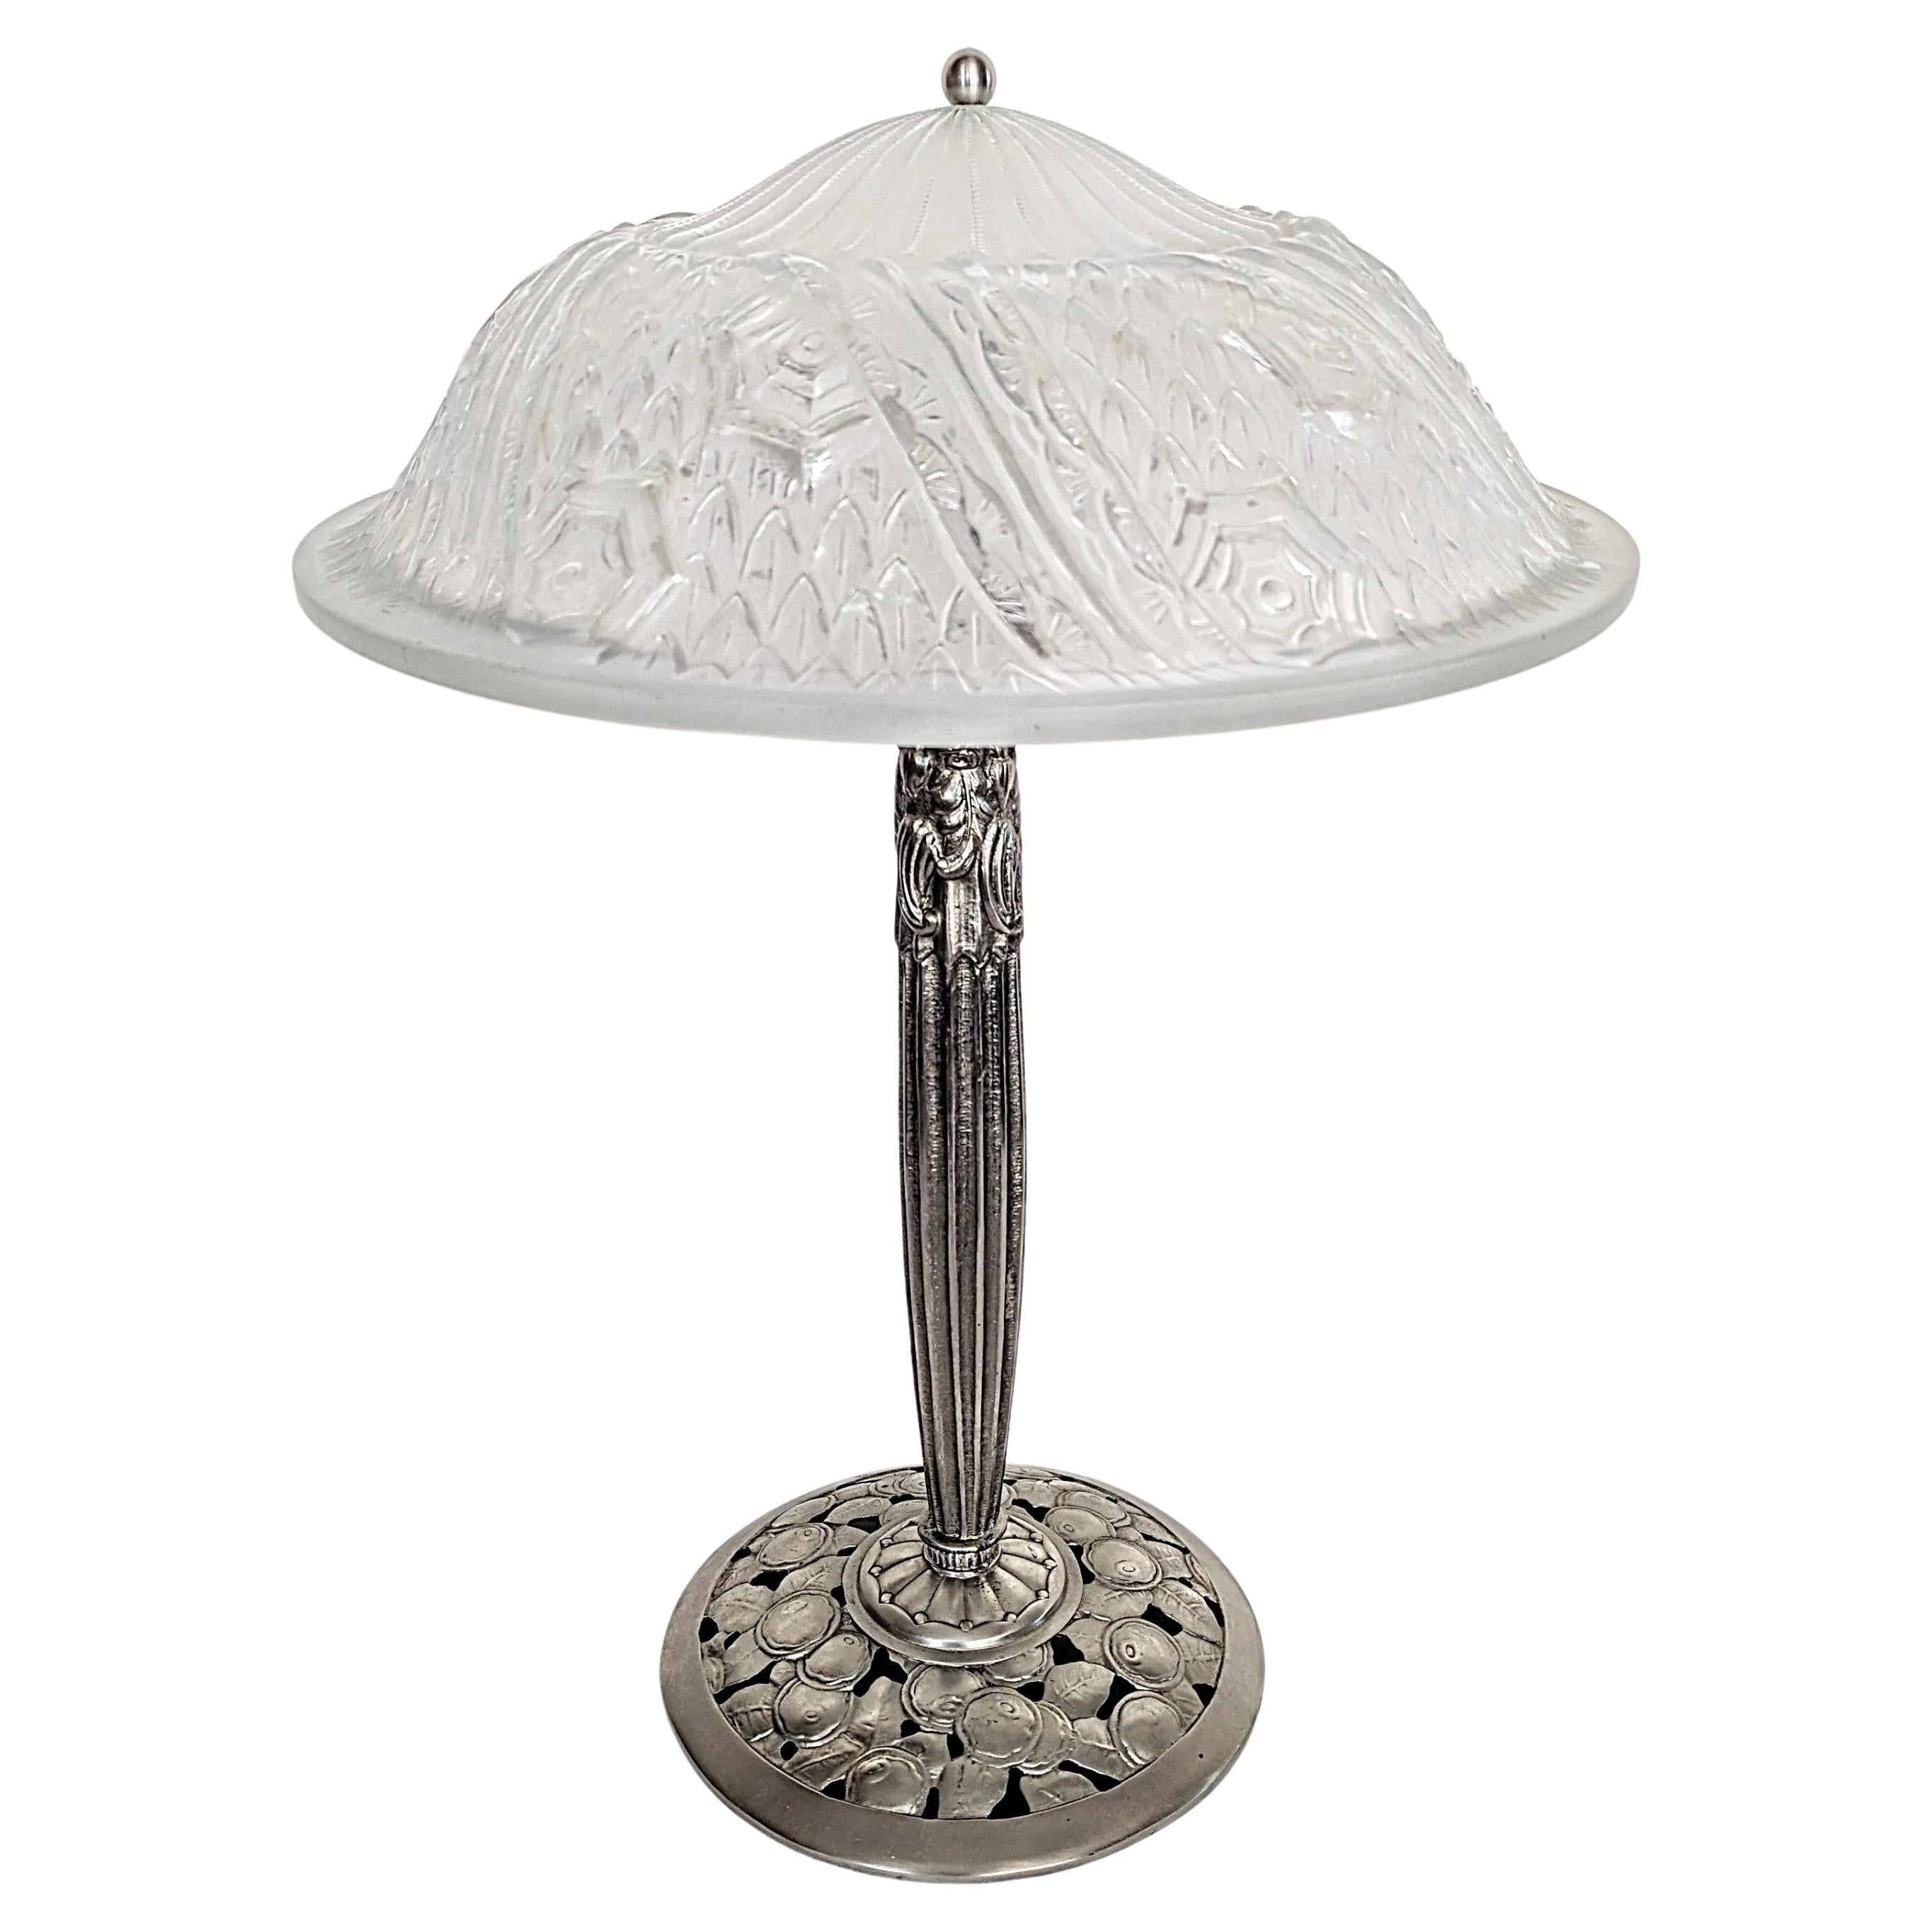 A French Art Deco table lamp by the French artist 